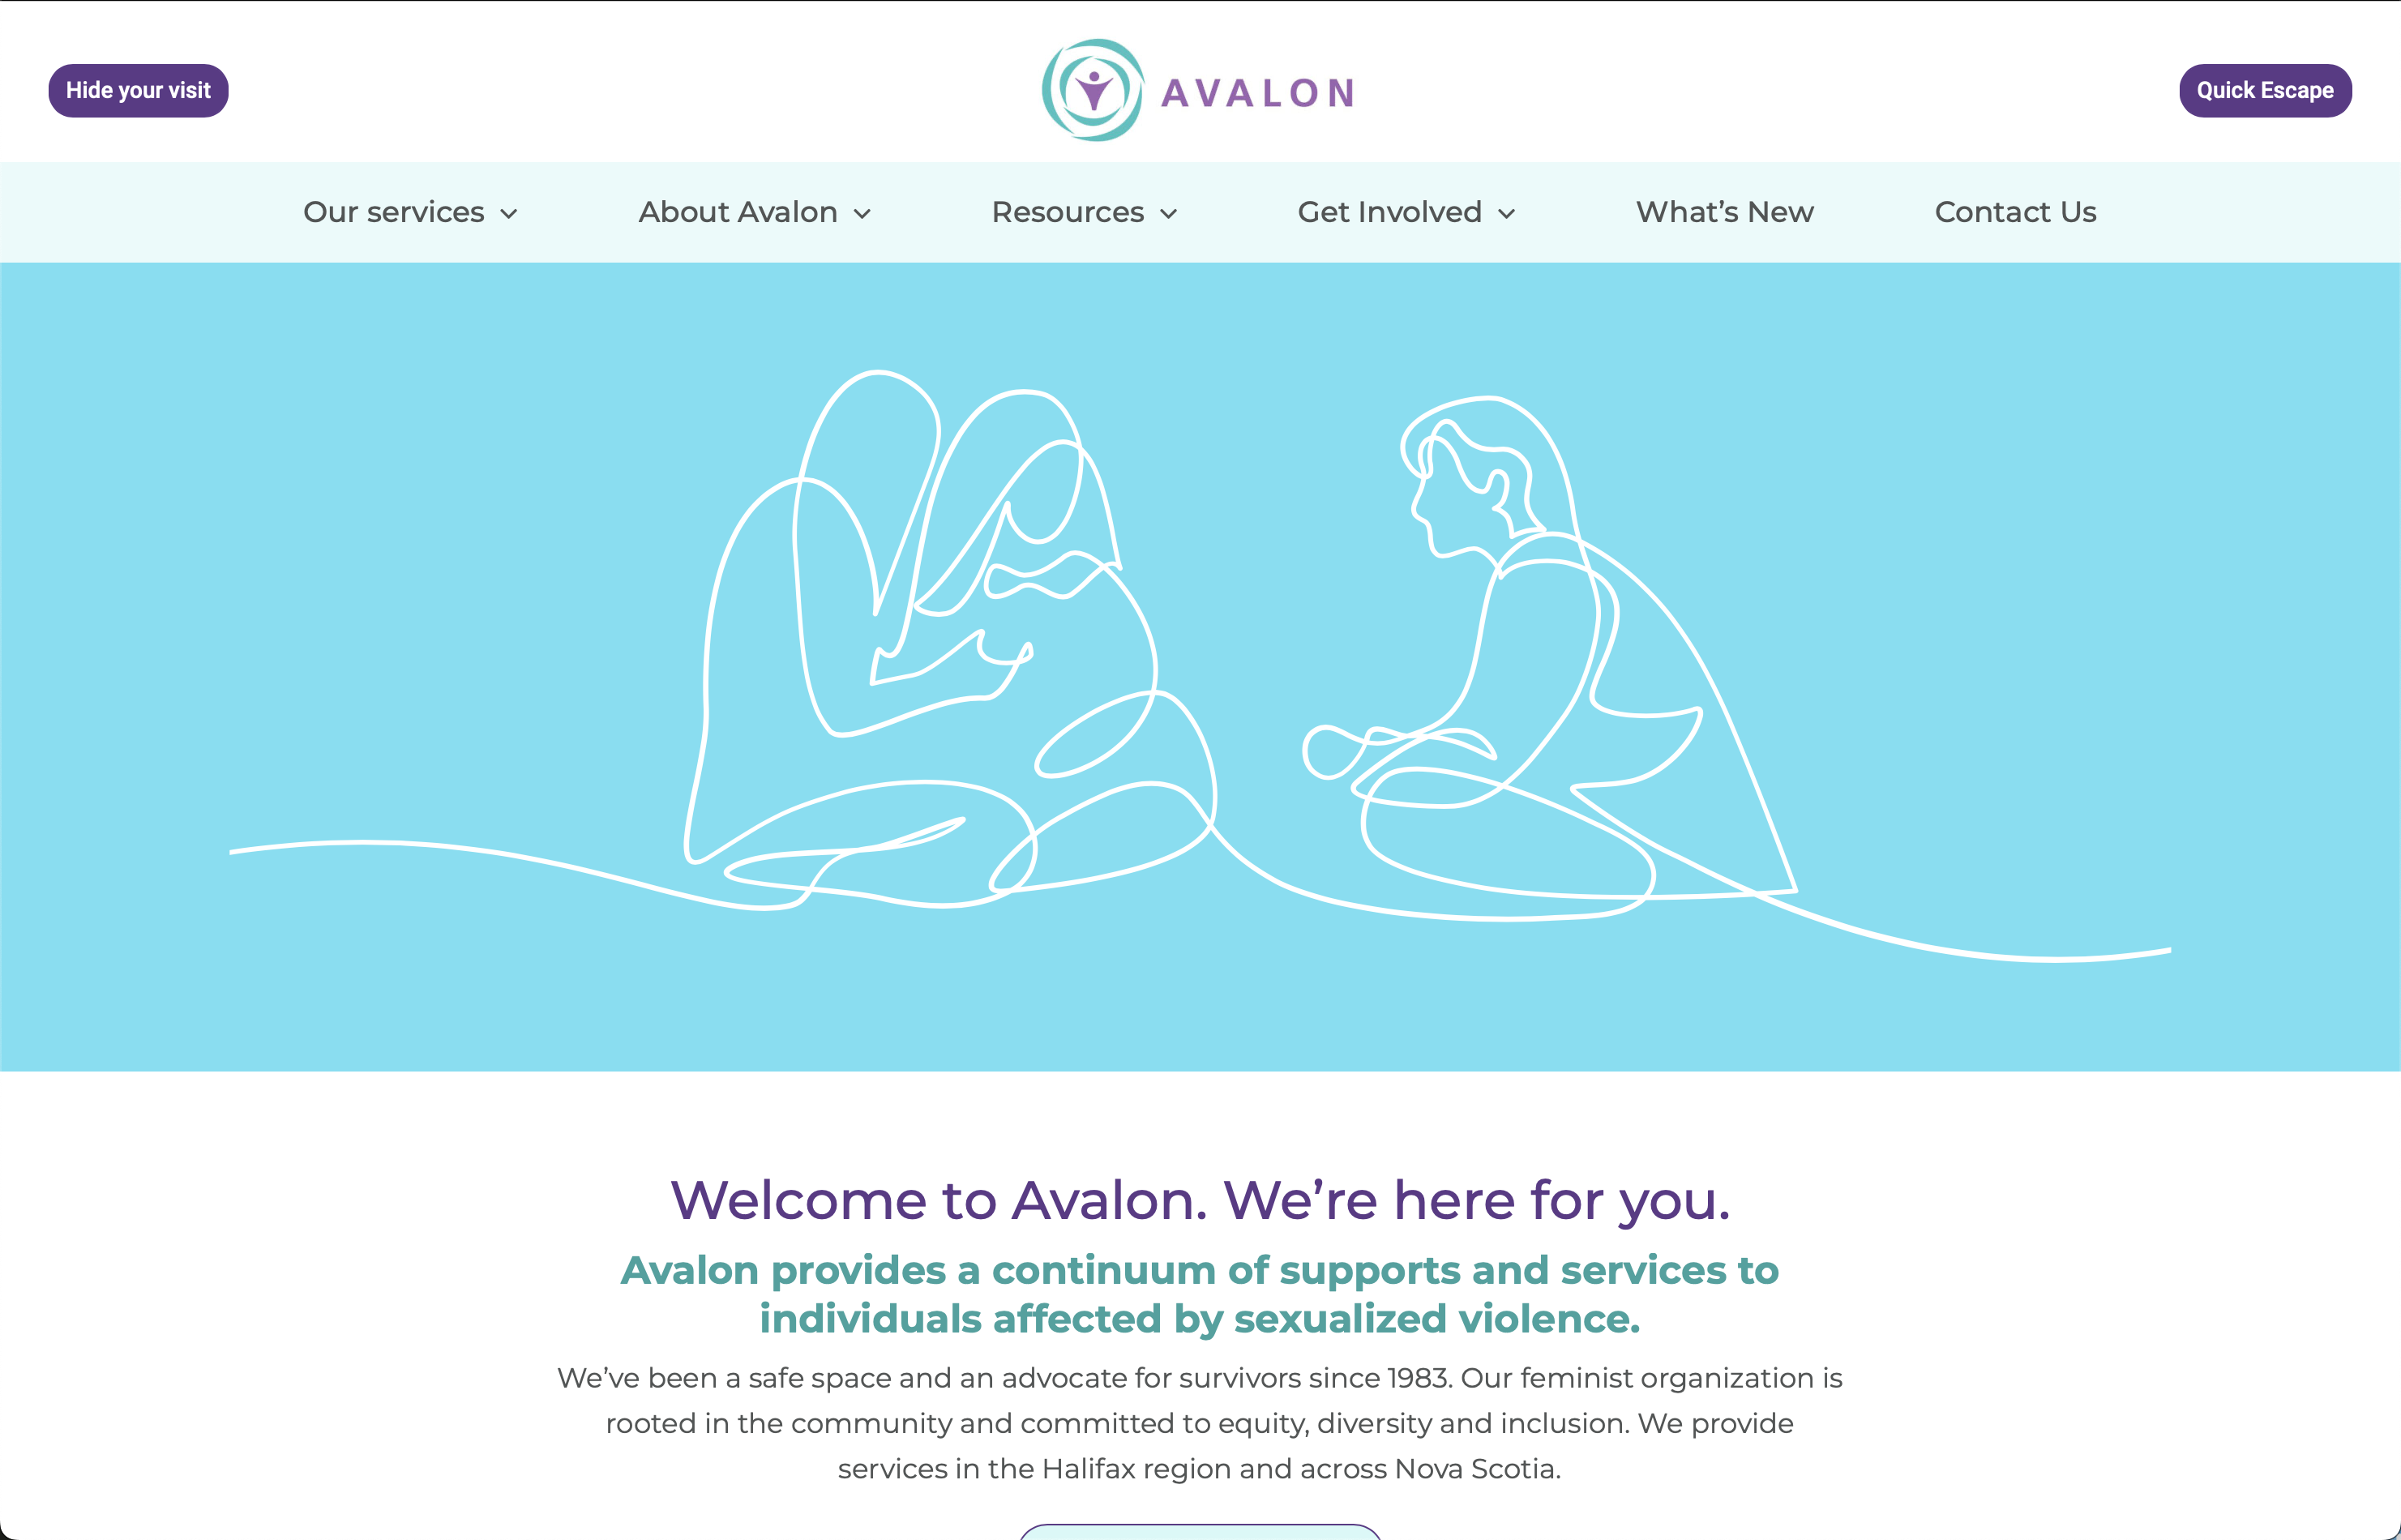 Screen Capture of the home page of Avalon